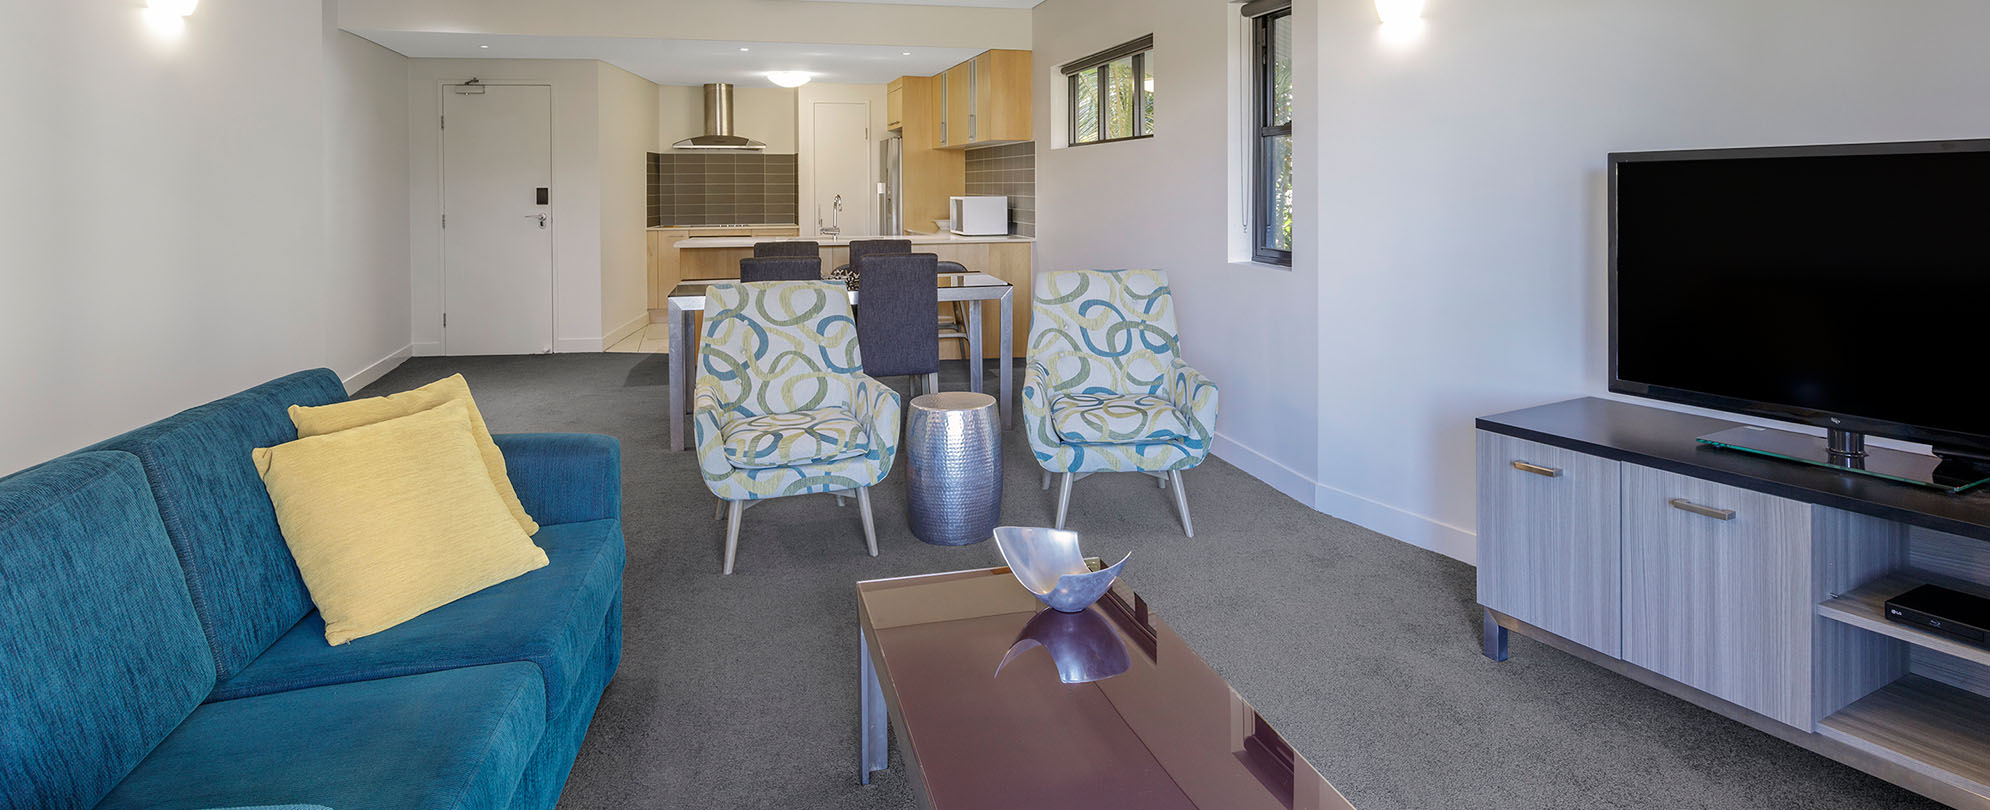 The living and dining area in a 2-bedroom grand suite at Club Wyndham Coffs Harbor.